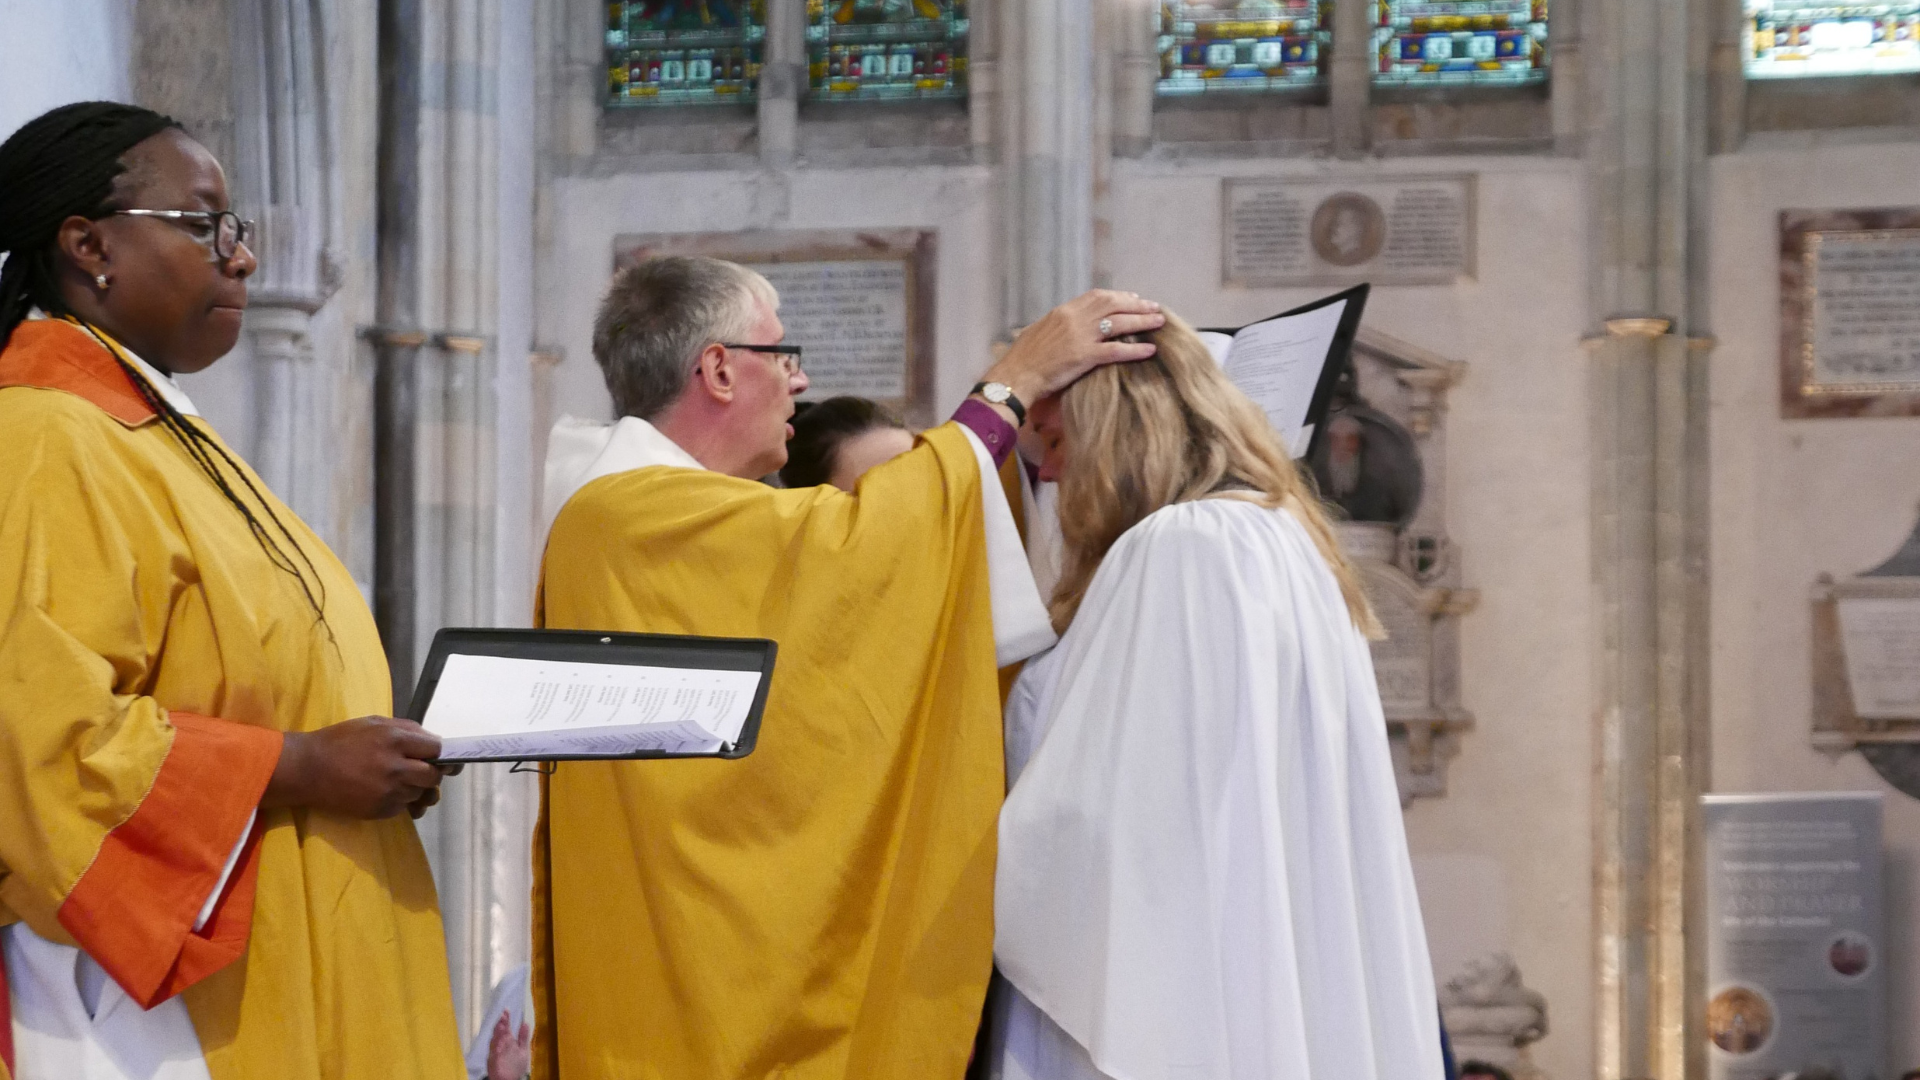 An ordinand stands in front of the bishop while he places his hands on her head.